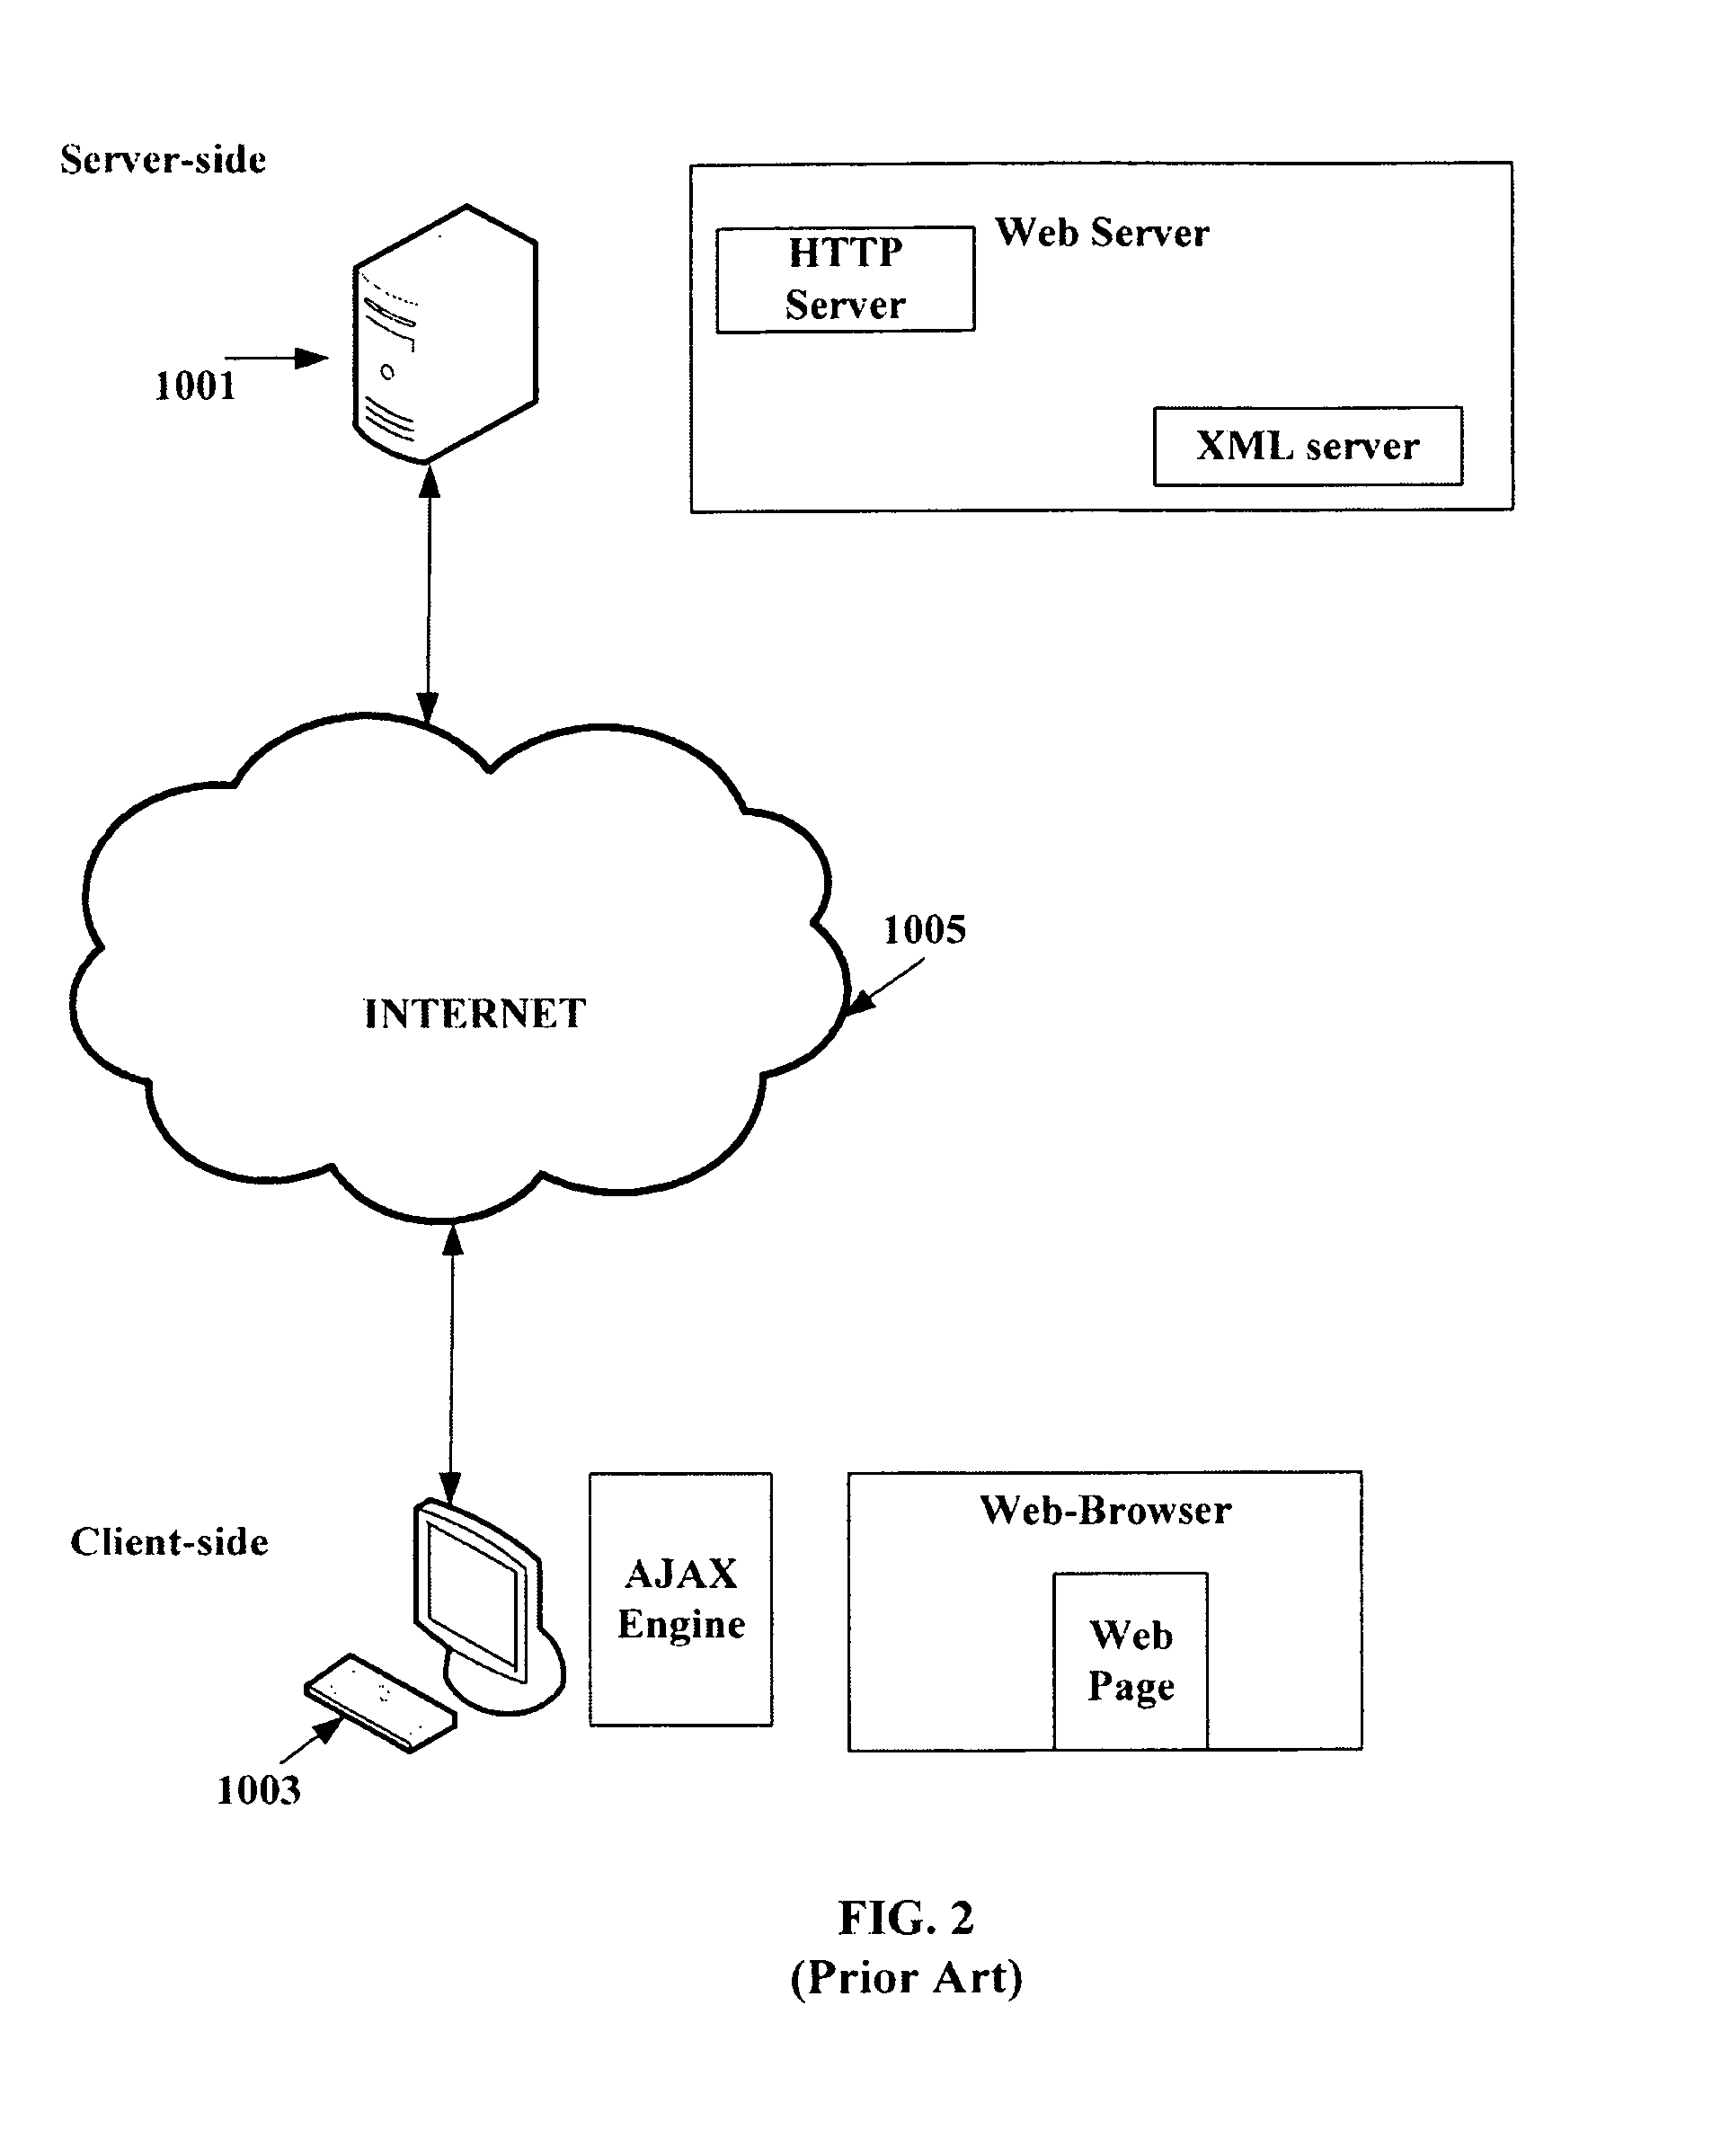 System and method for exposing the dynamic web server-side